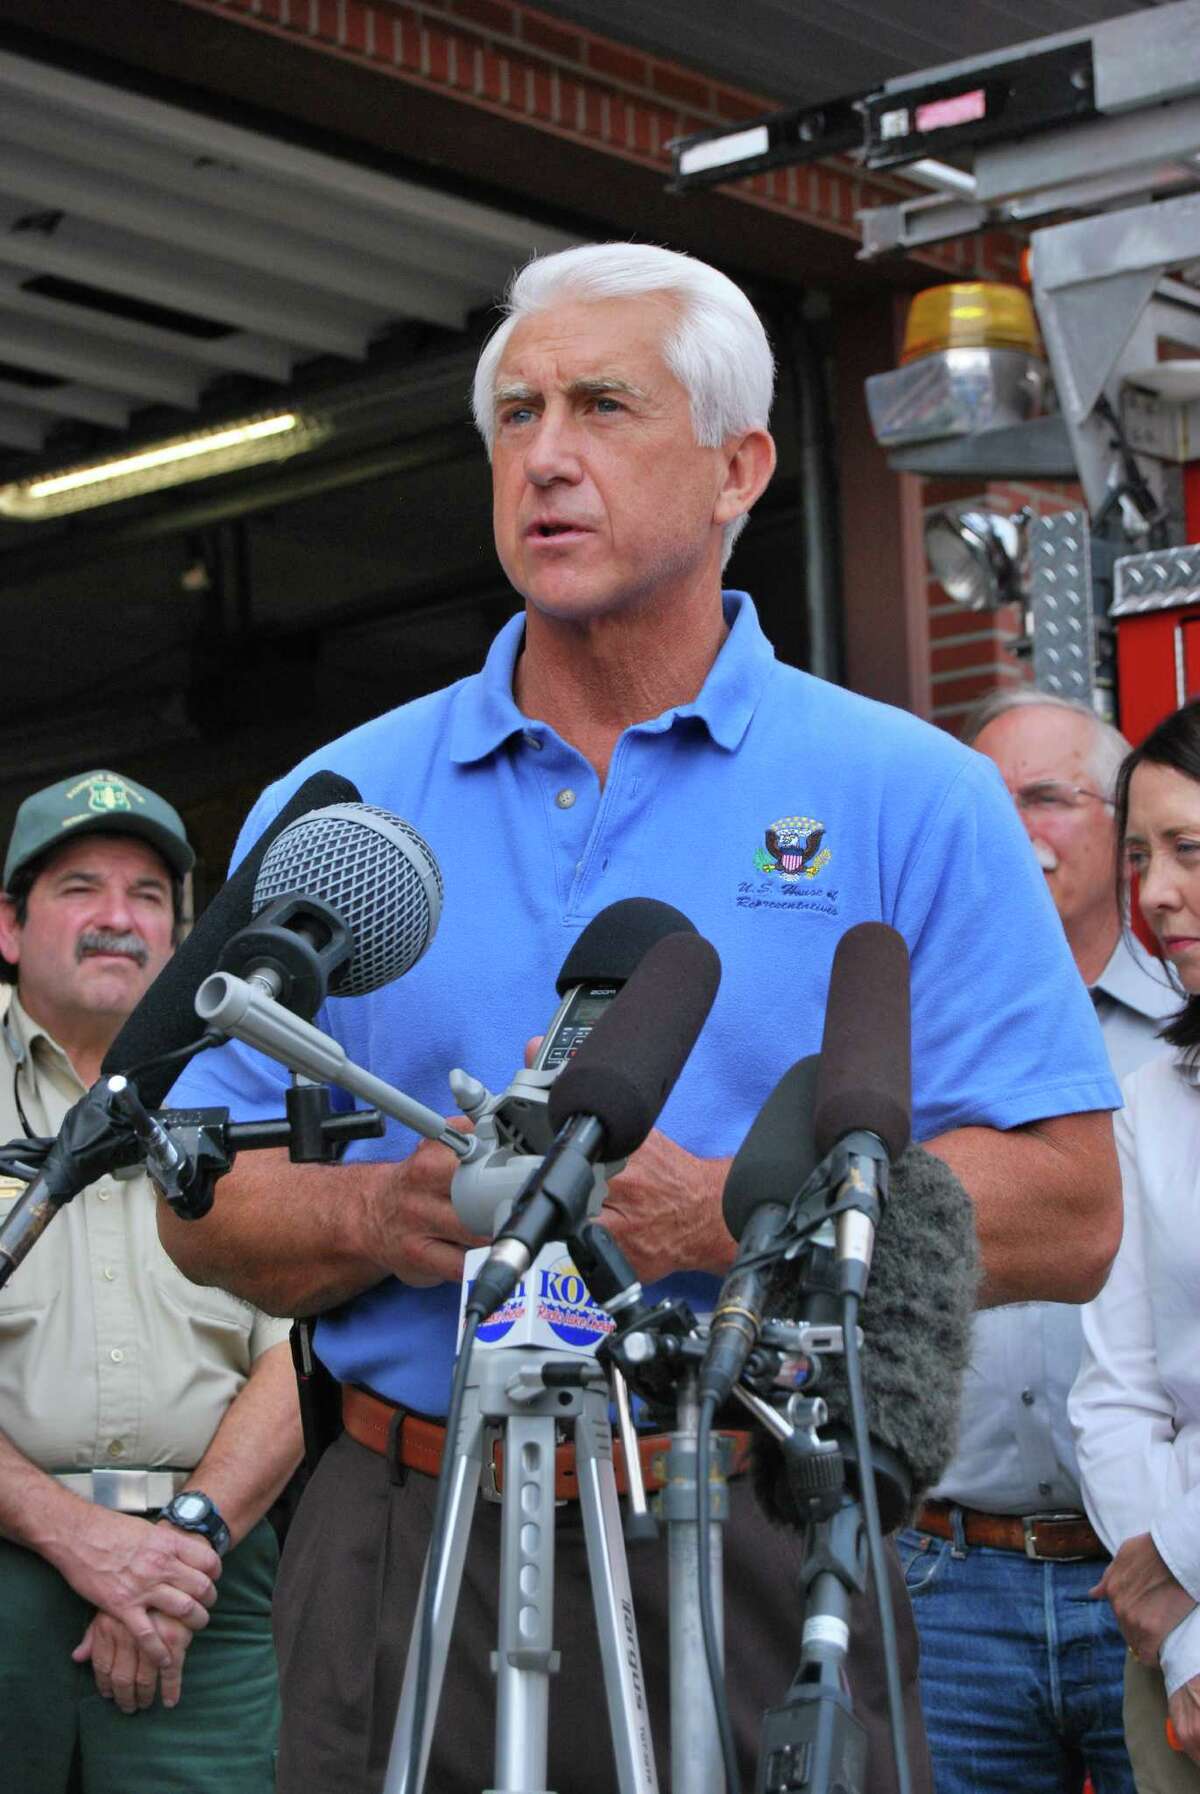 Washington Rep. Dave Reichert is a Republican team player on the House Ways and Means Committee, but went off the reservation in the fight to keep the U.S. Export-Import Bank, which supports sales of U.S. products (e.g. Boeing jets) to foreign buyers.